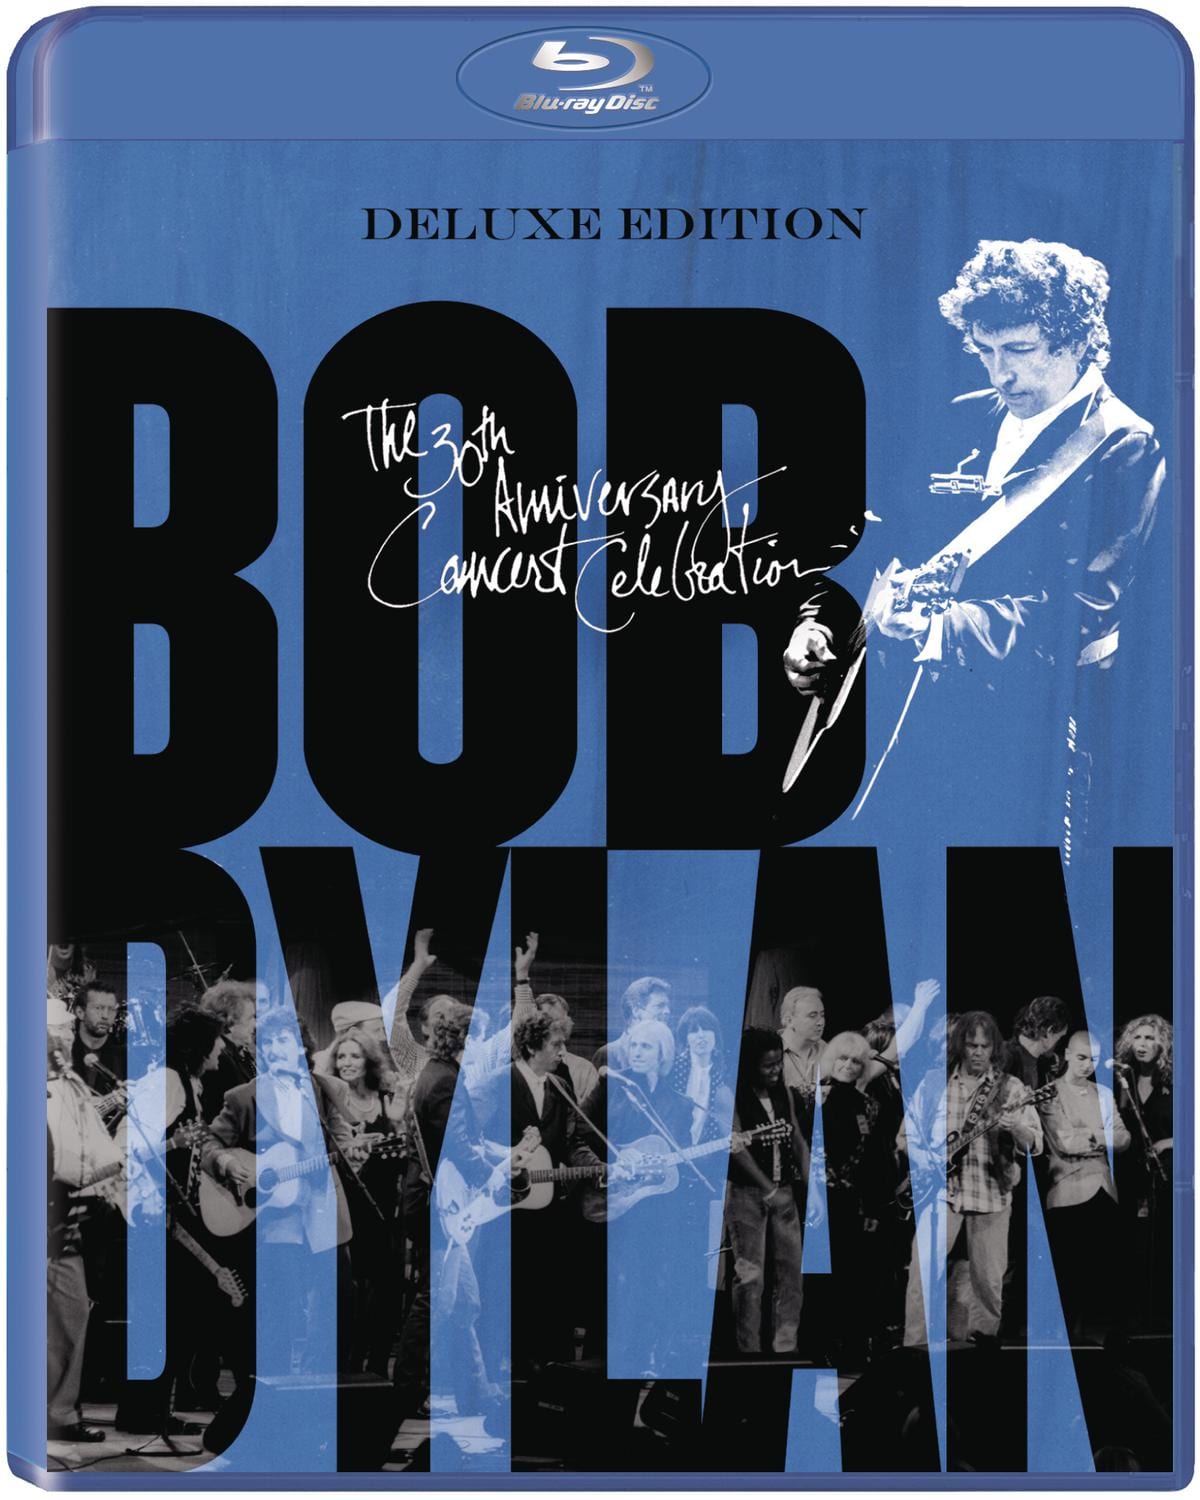 Bob Dylan - The 30th Anniversary Concert Celebration Deluxe Edition - Artwork